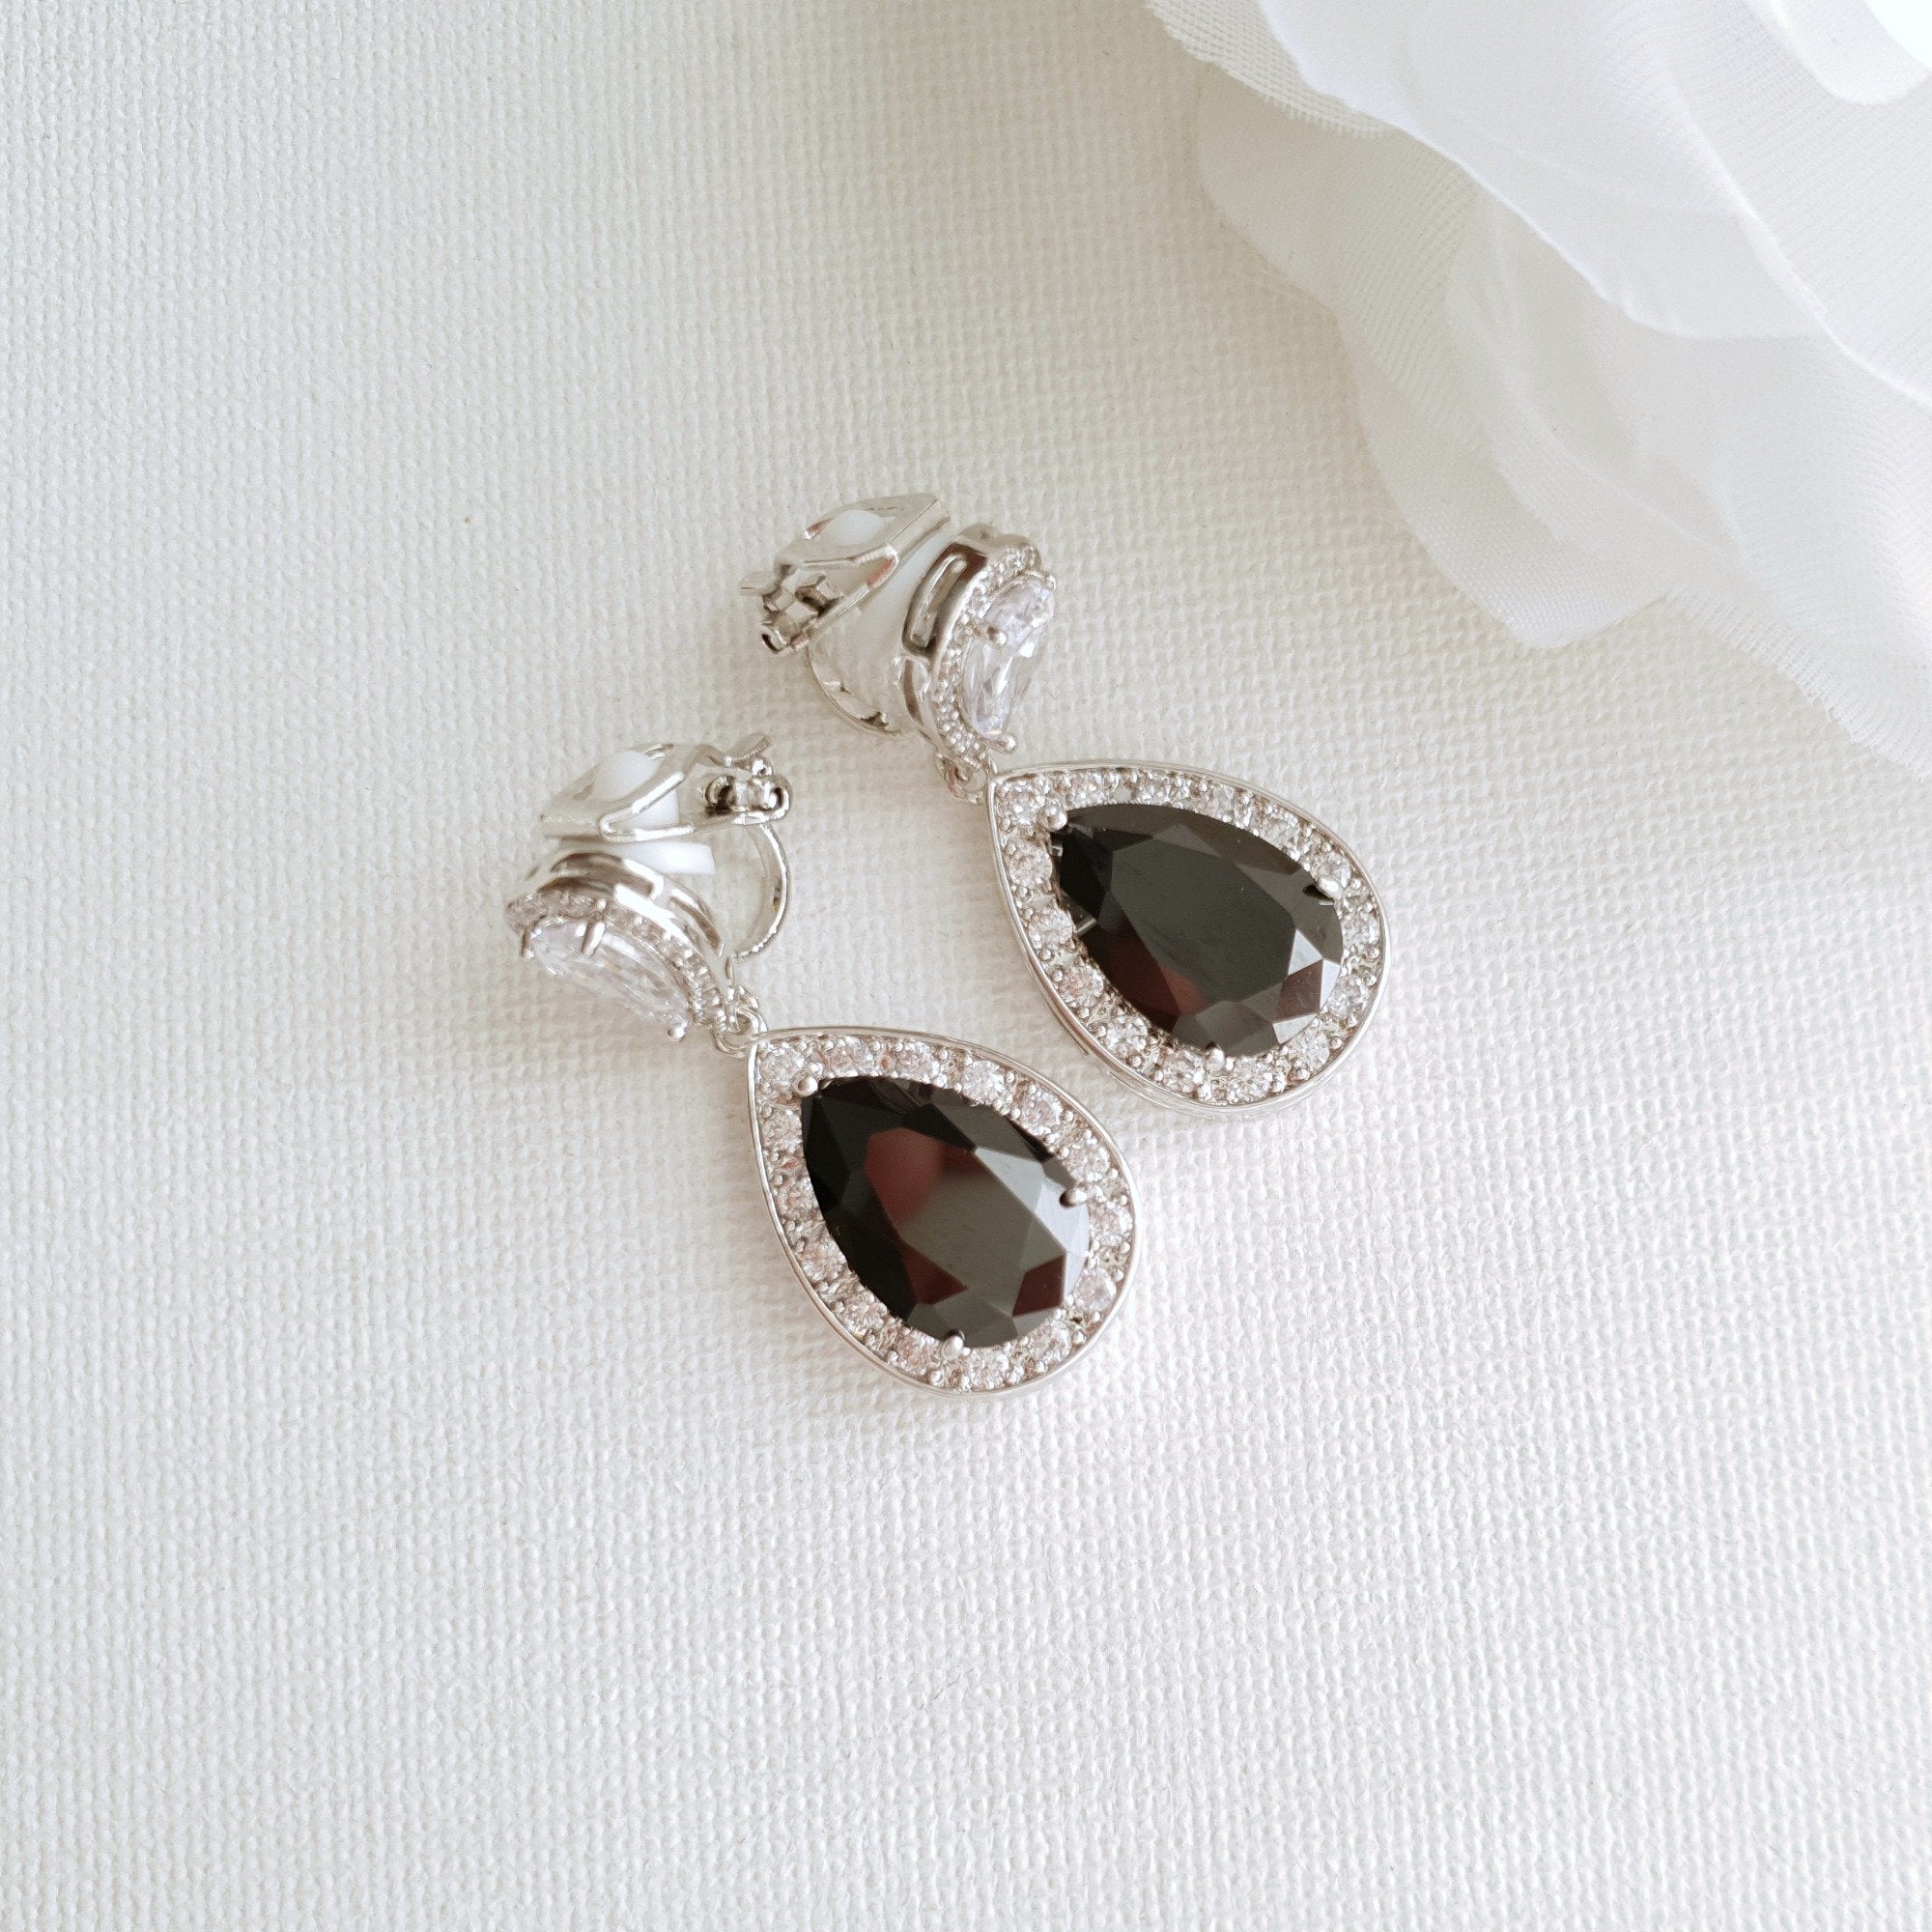 Mexican Mahogany Obsidian and Silver Clip-on Earrings c. 1980s, 1.375